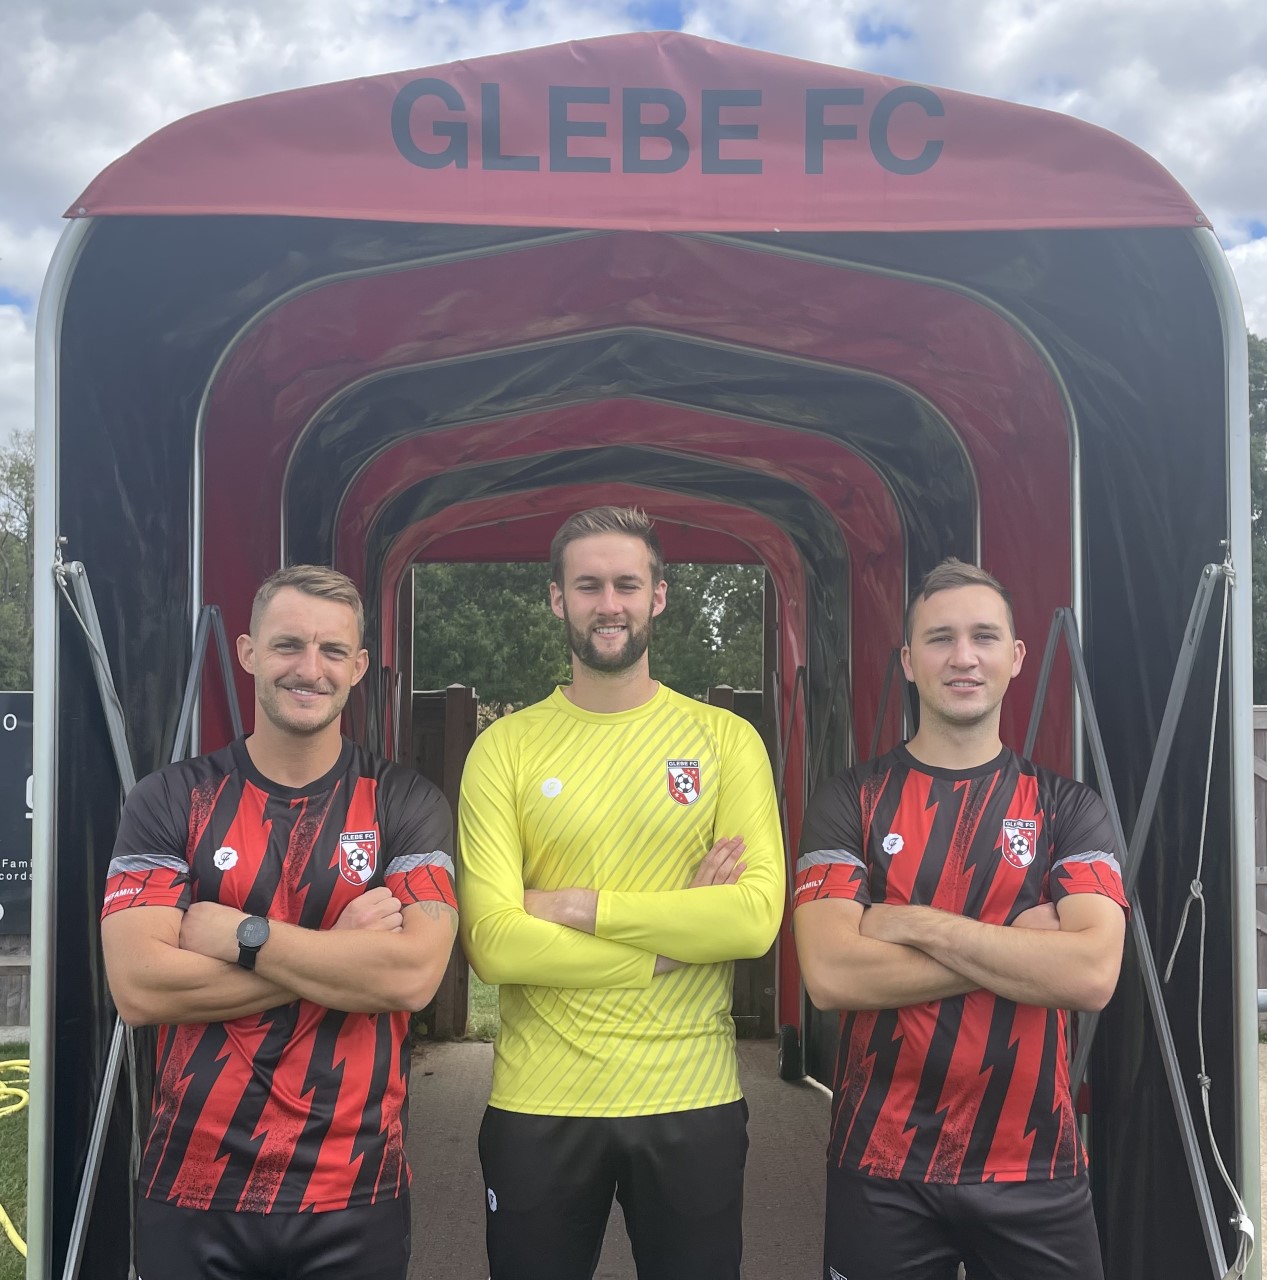 Sponsorship Opportunities with Glebe FC